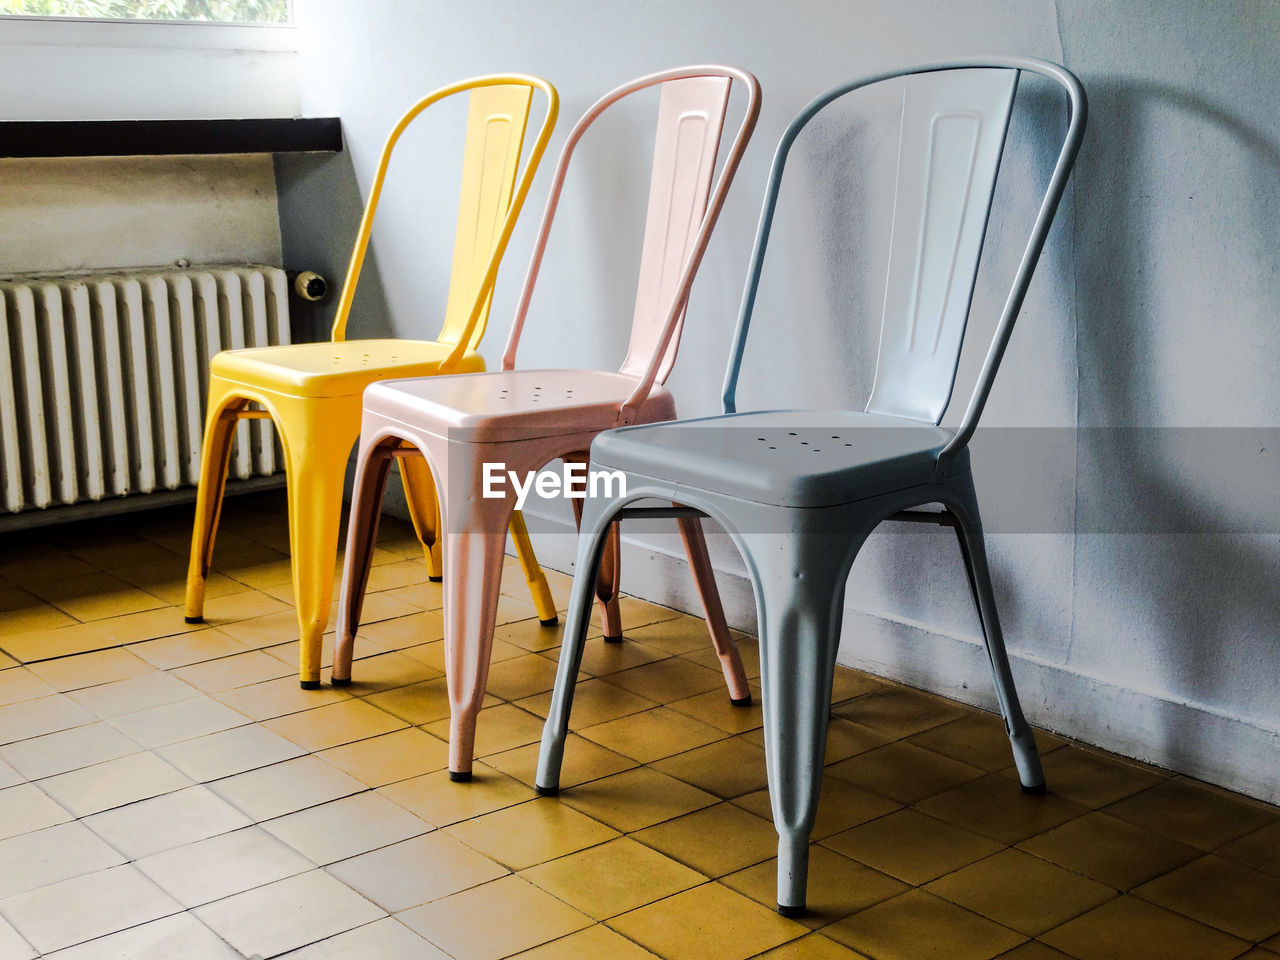 Empty chairs against tiled floor